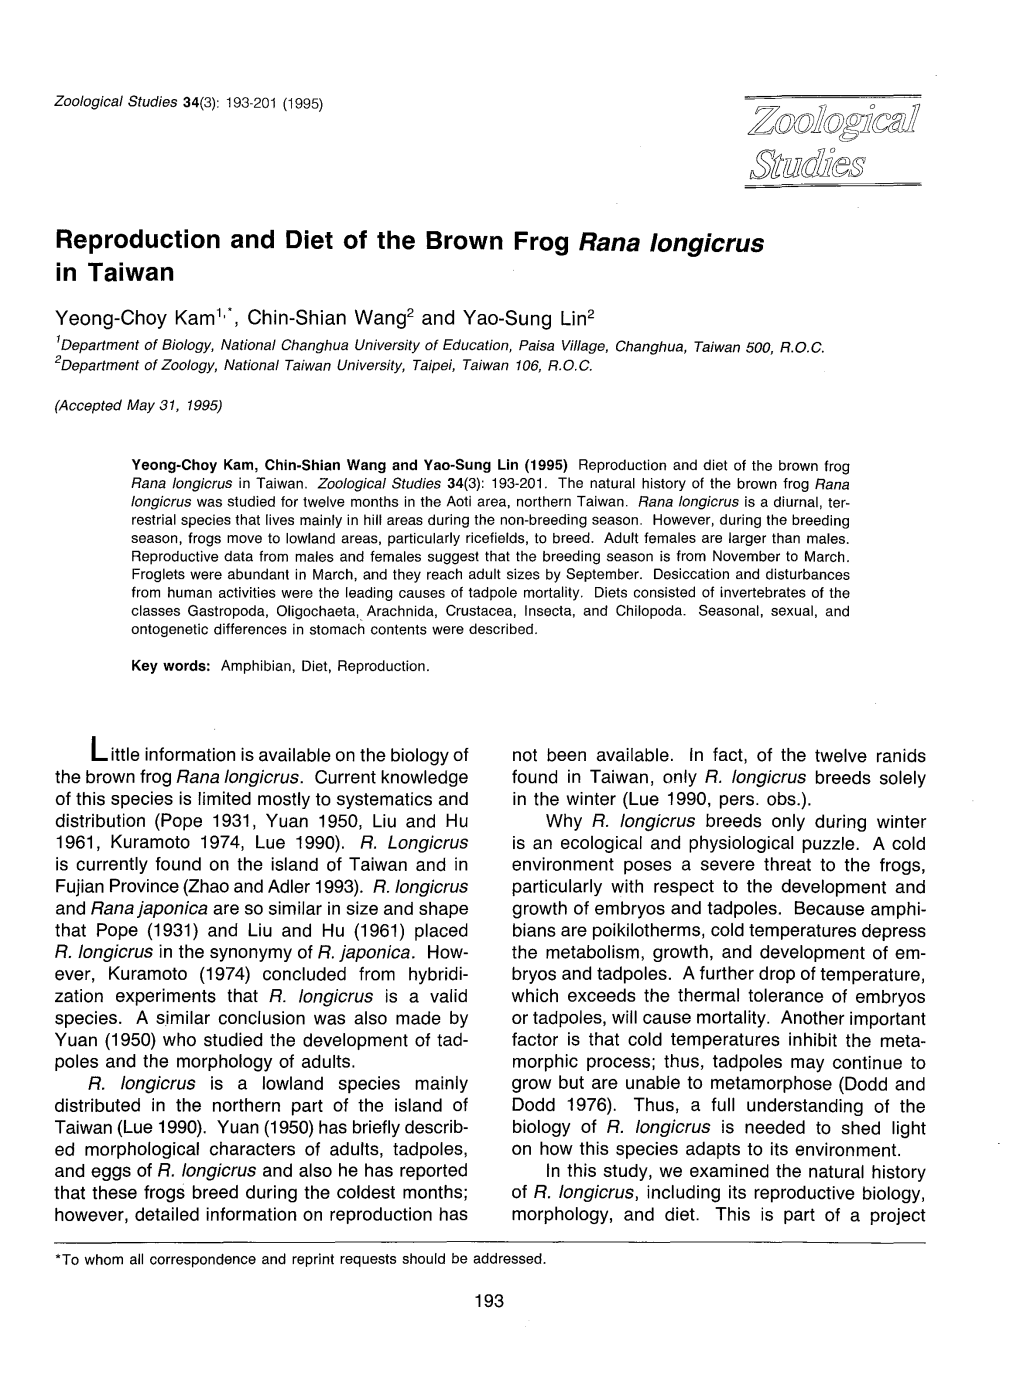 Reproduction and Diet of the Brown Frog Rana Longicrus in Taiwan